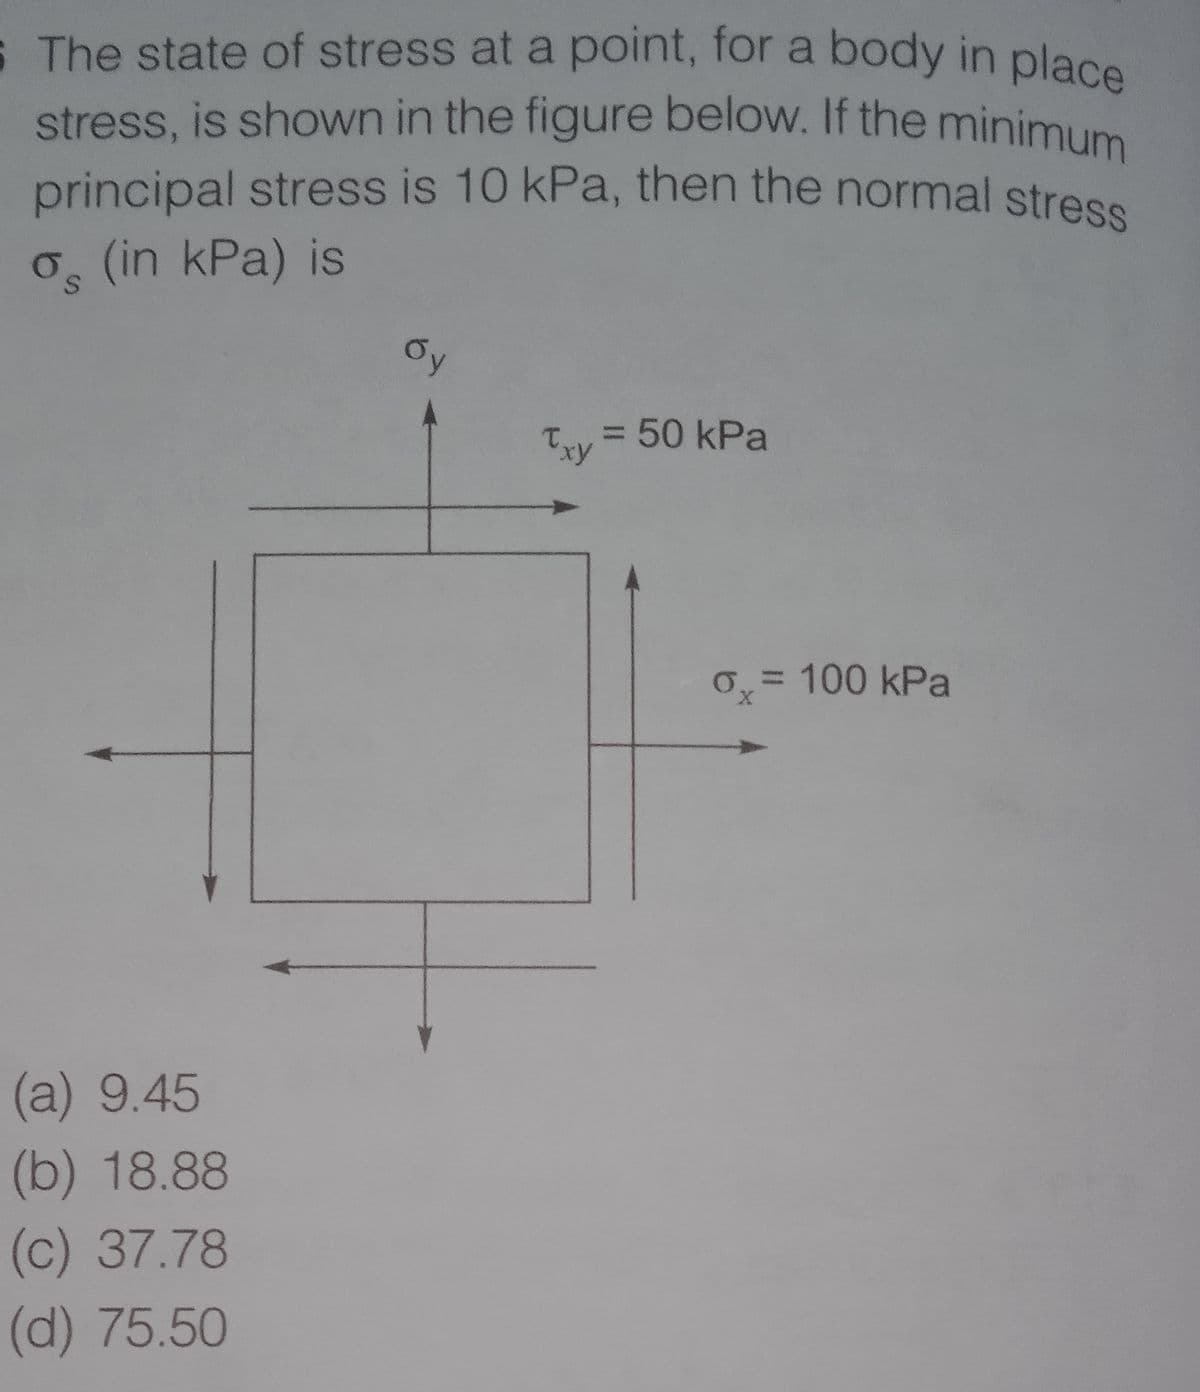 principal stress is 10 kPa, then the normal stress
S The state of stress at a point, for a body in place
stress, is shown in the figure below. If the minimum
stress, is shown in the figure below. If the minimum
principal stress is 10 kPa, then the normal stress
o (in kPa) is
Oy
Txy = 50 kPa
= 100 kPa
X,
(a) 9.45
(b) 18.88
(c) 37.78
(d) 75.50
